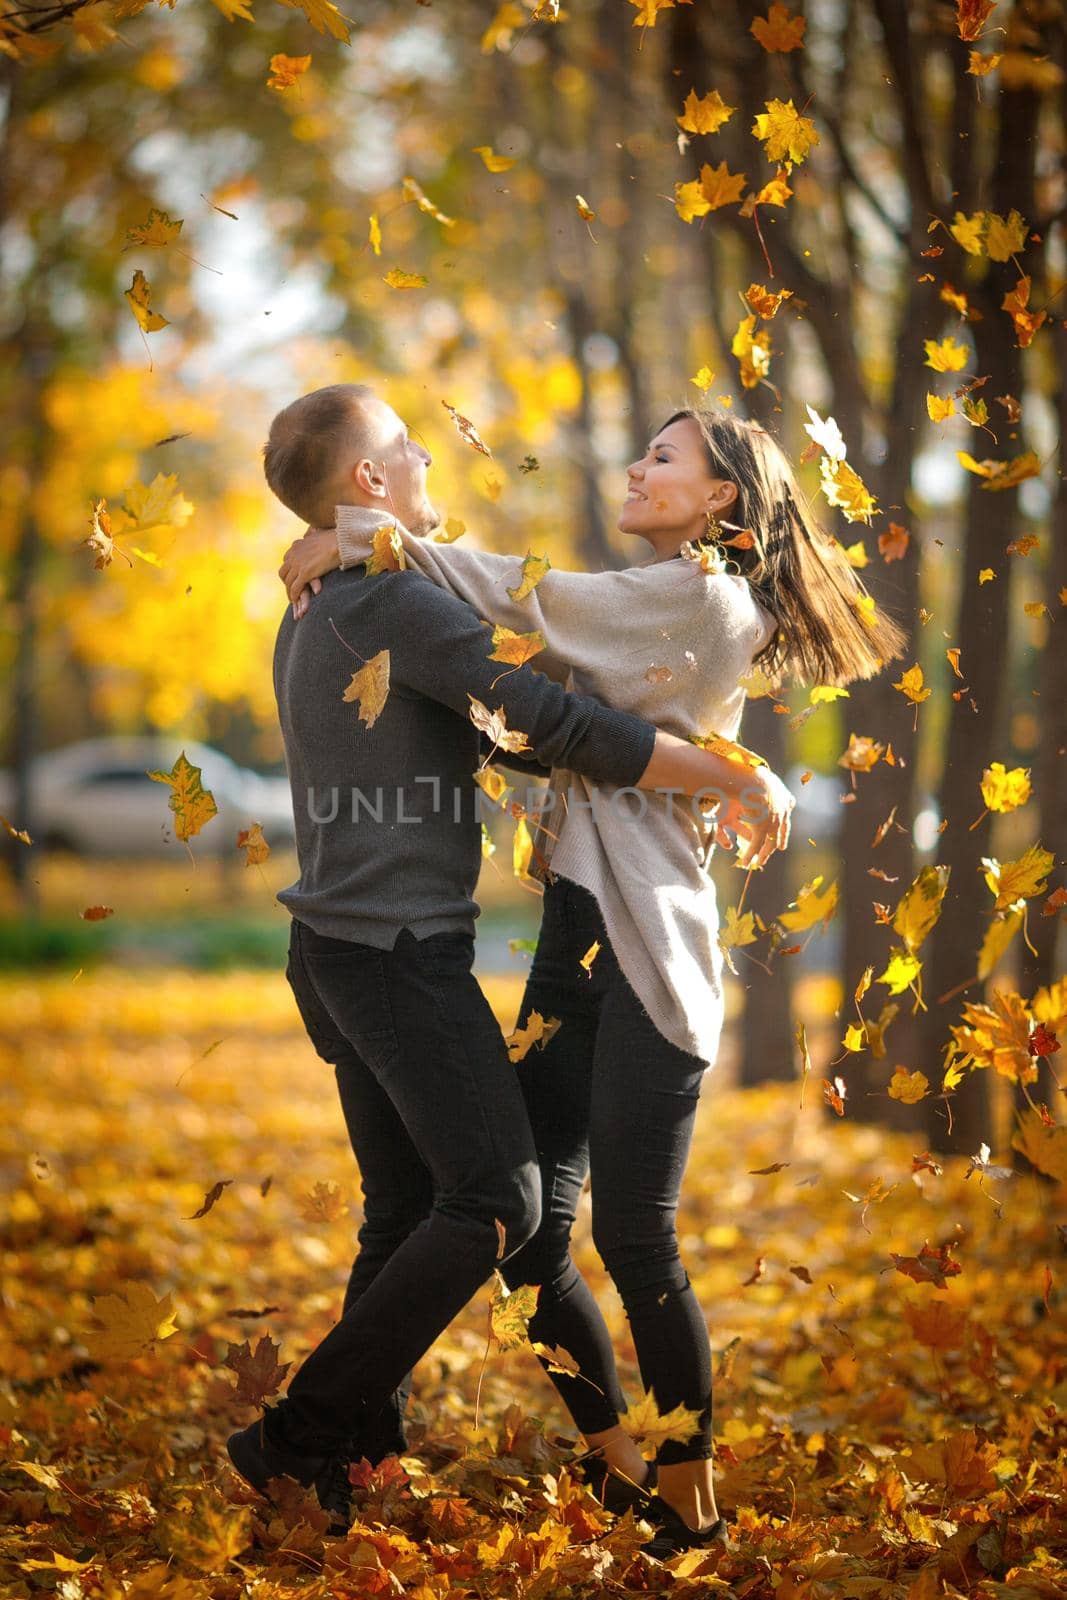 Young couple in love whirl in dance on dating in autumn nature under autumn leaf fall.